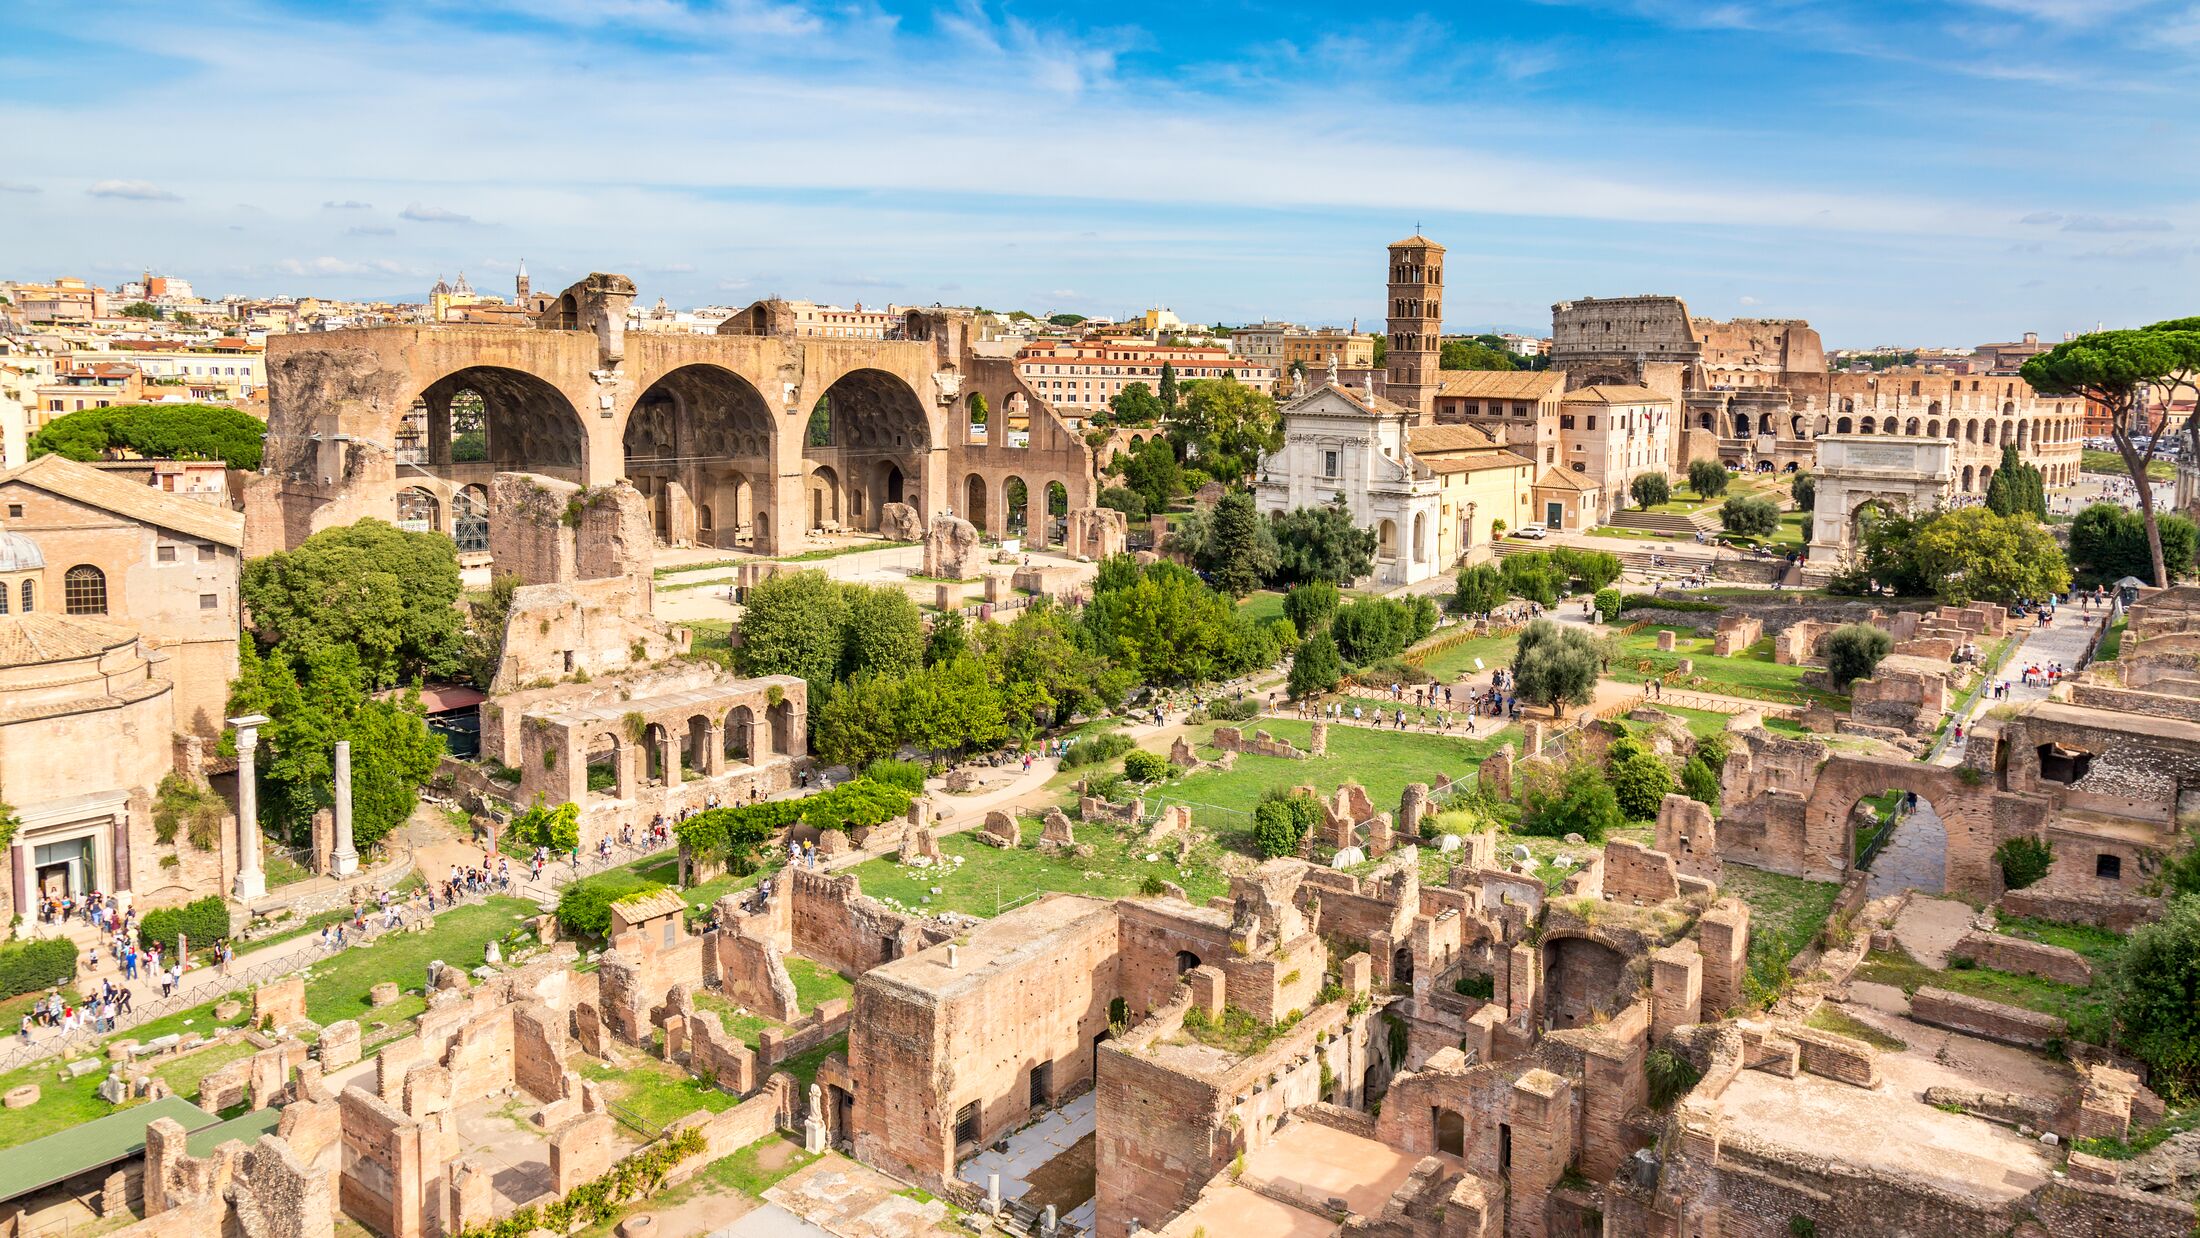 Aerial panoramic cityscape view of the Roman Forum and Roman Colosseum in Rome, Italy. World famous landmarks in Italy during summer sunny day.